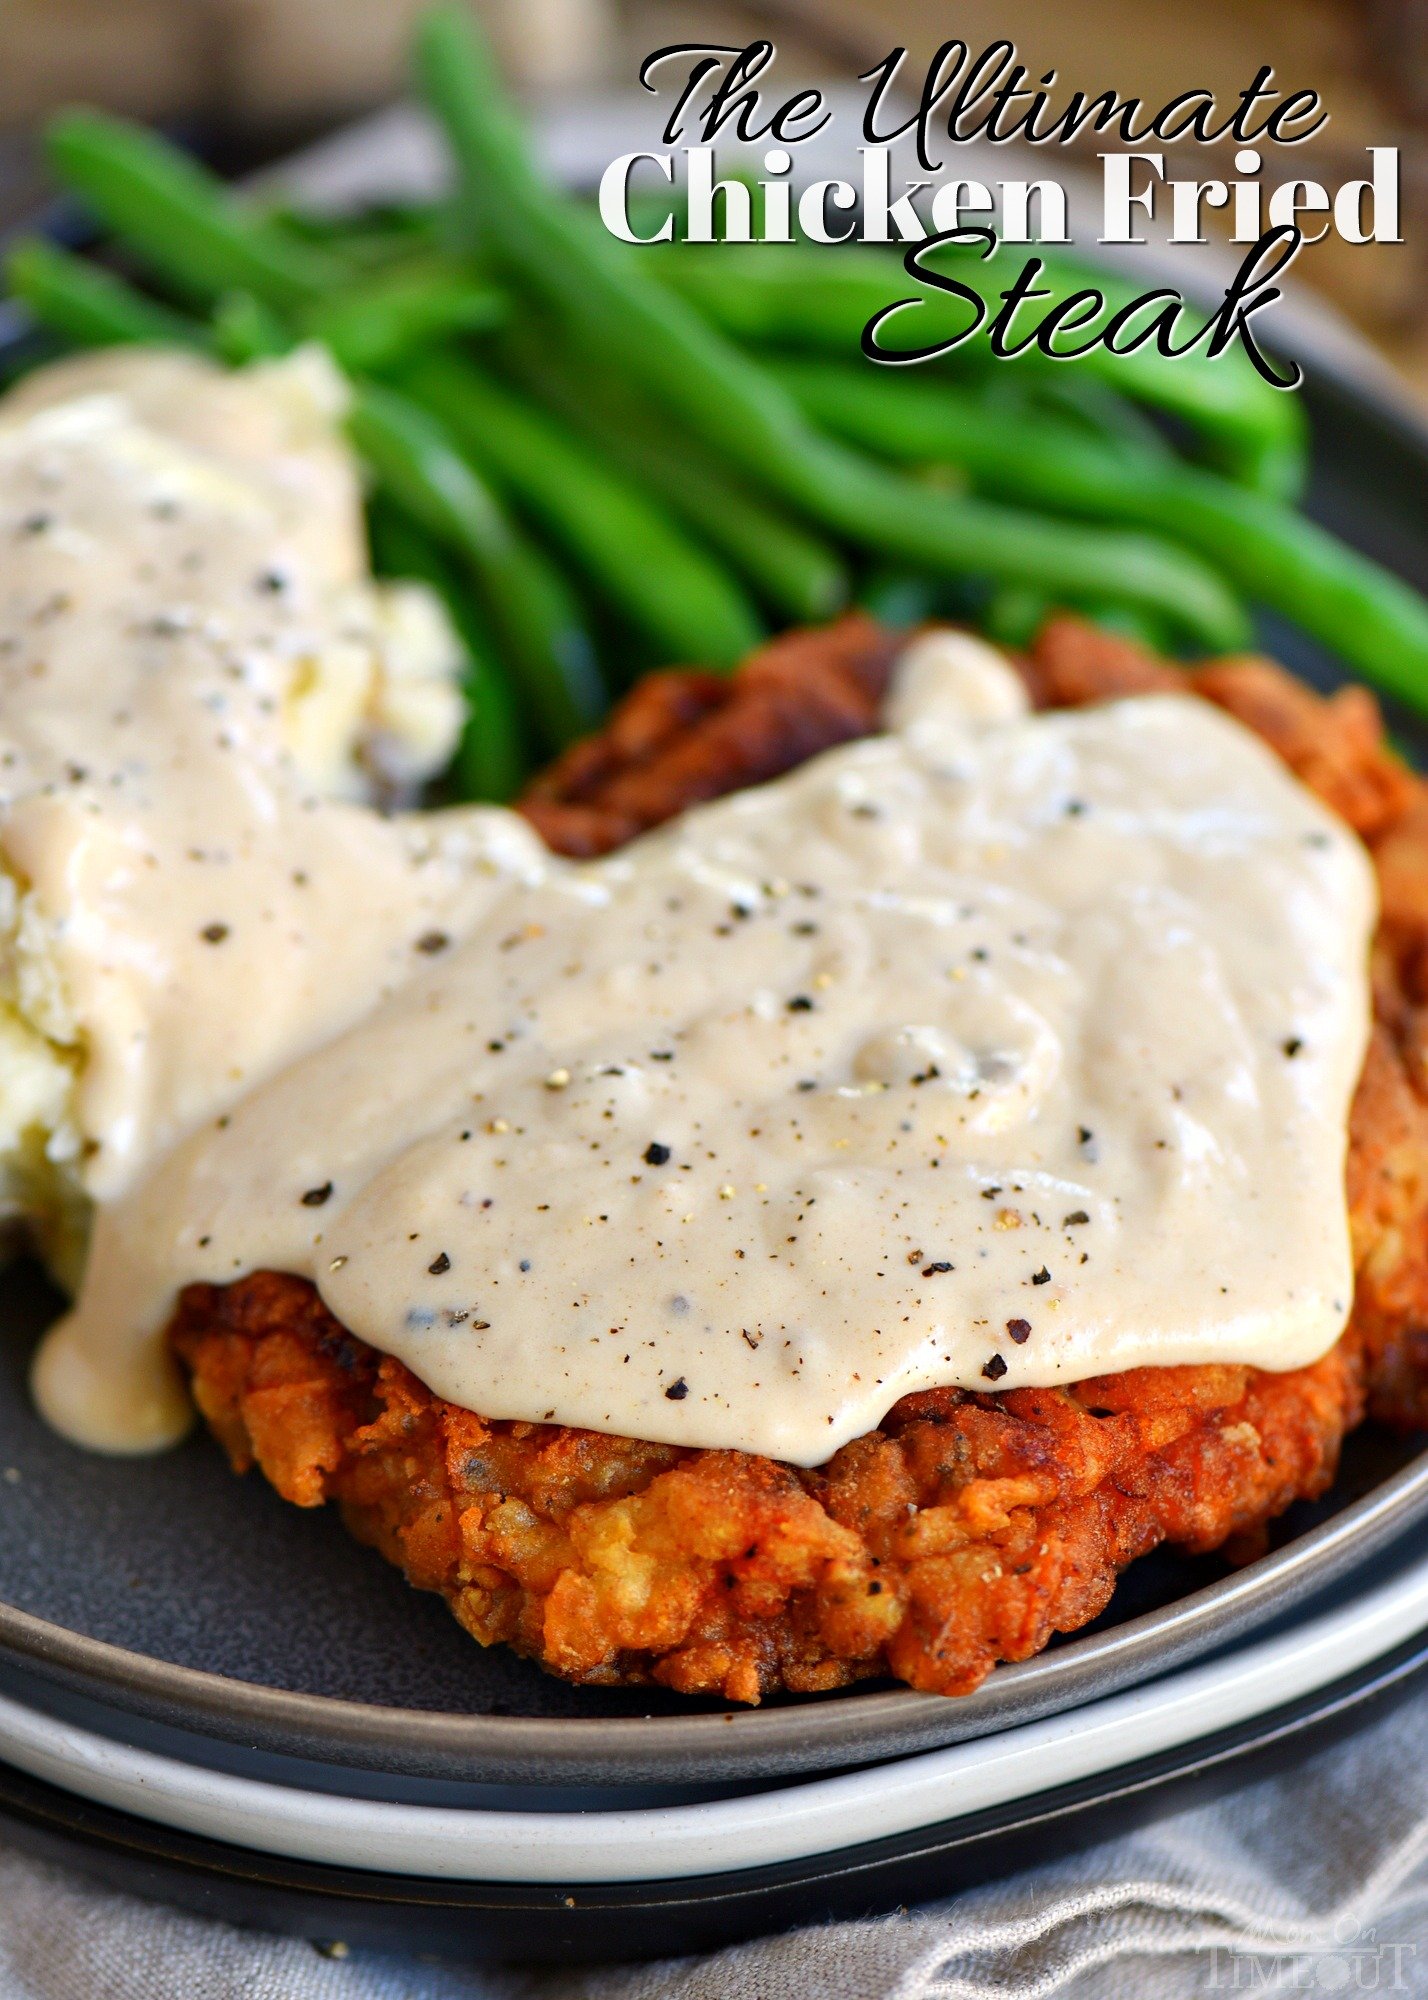 The Ultimate Chicken Fried Steak Recipe with Gravy